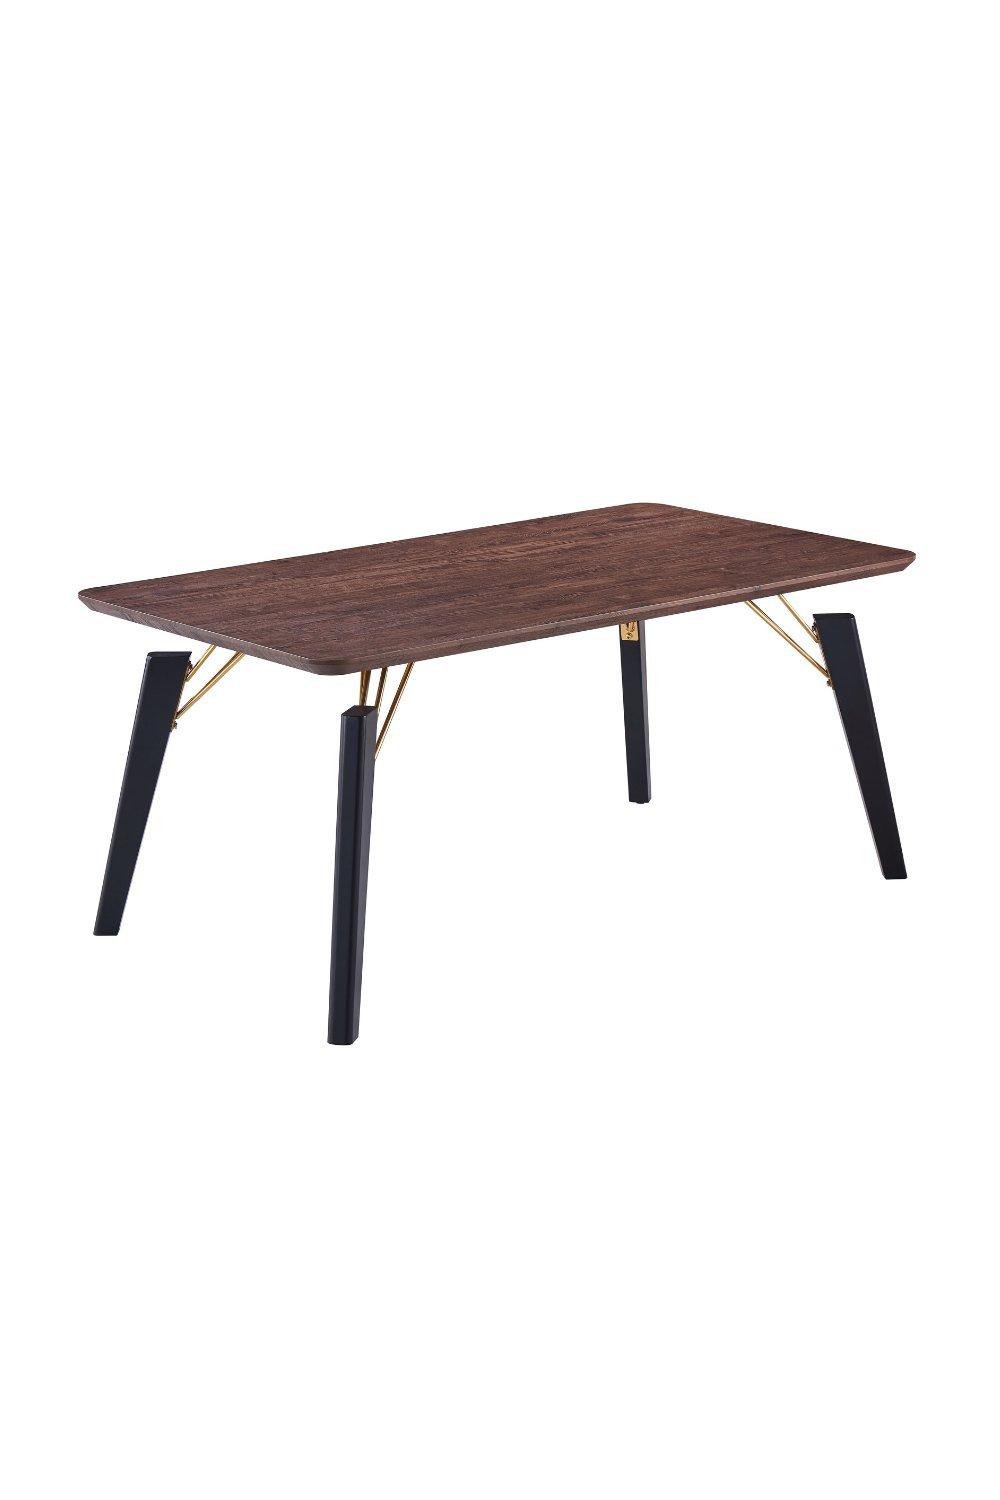 'Cosmo' LUX Dining Table Single